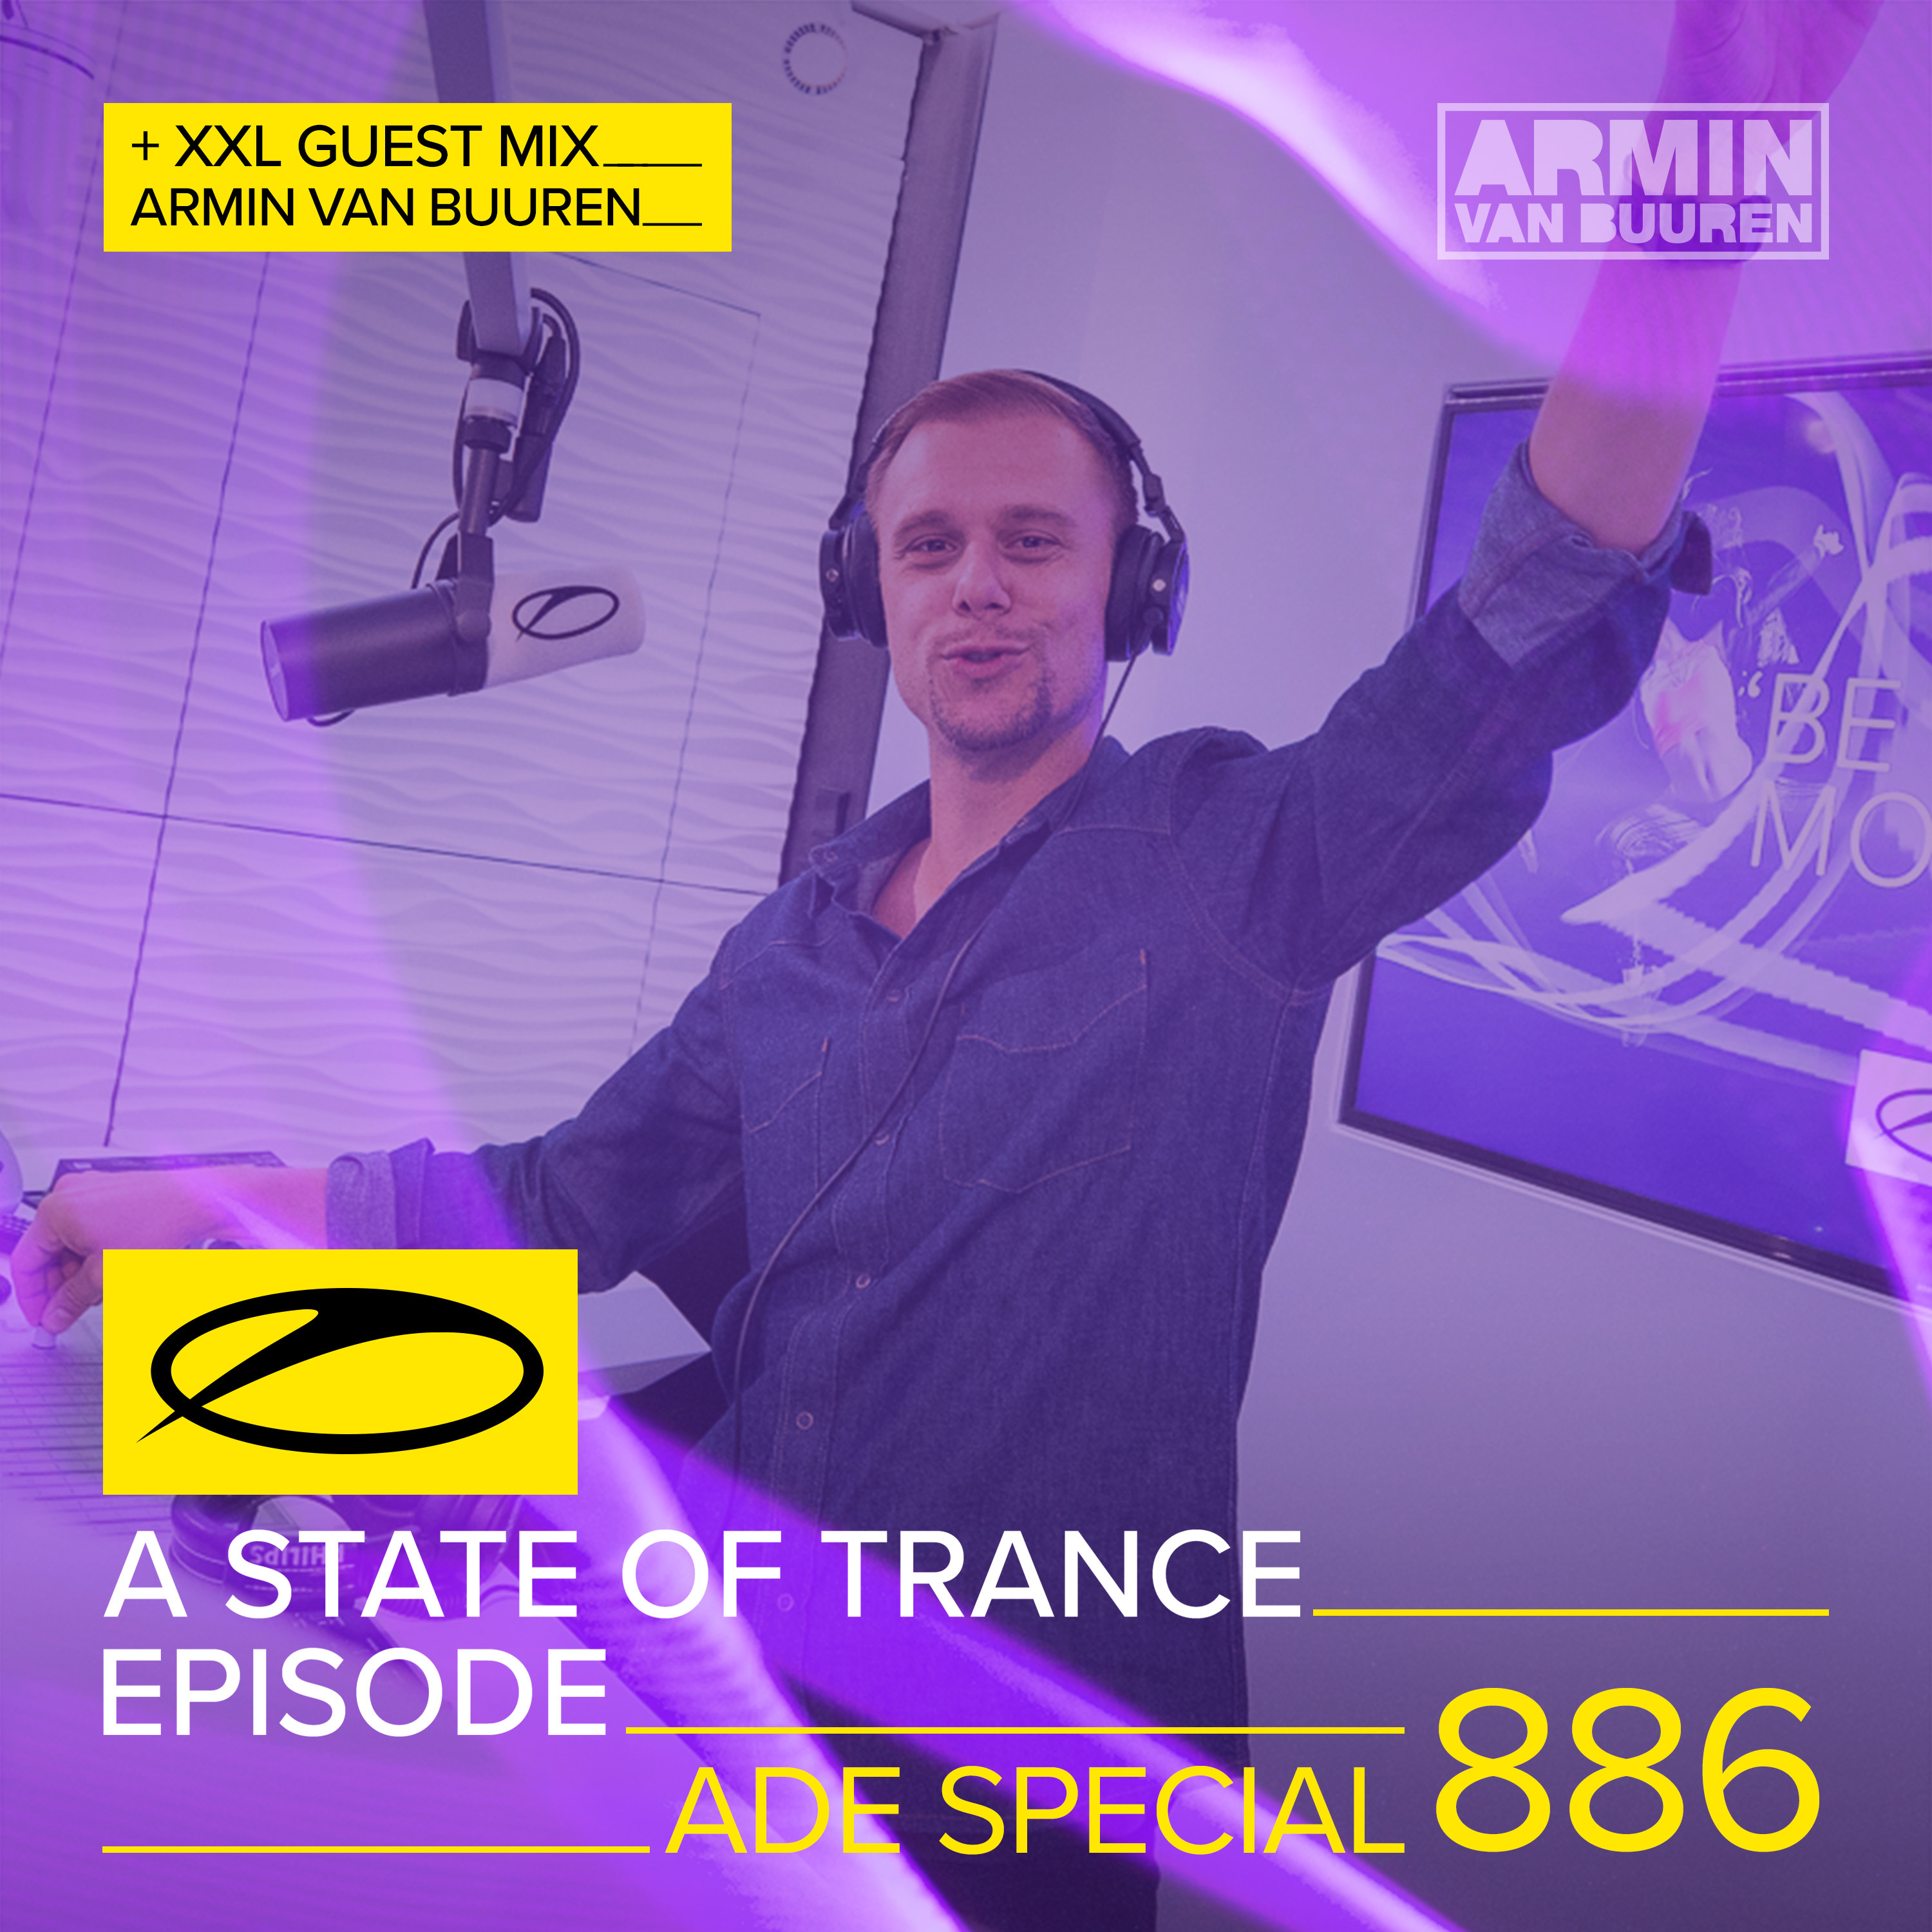 More Of Your Love (ASOT 886)